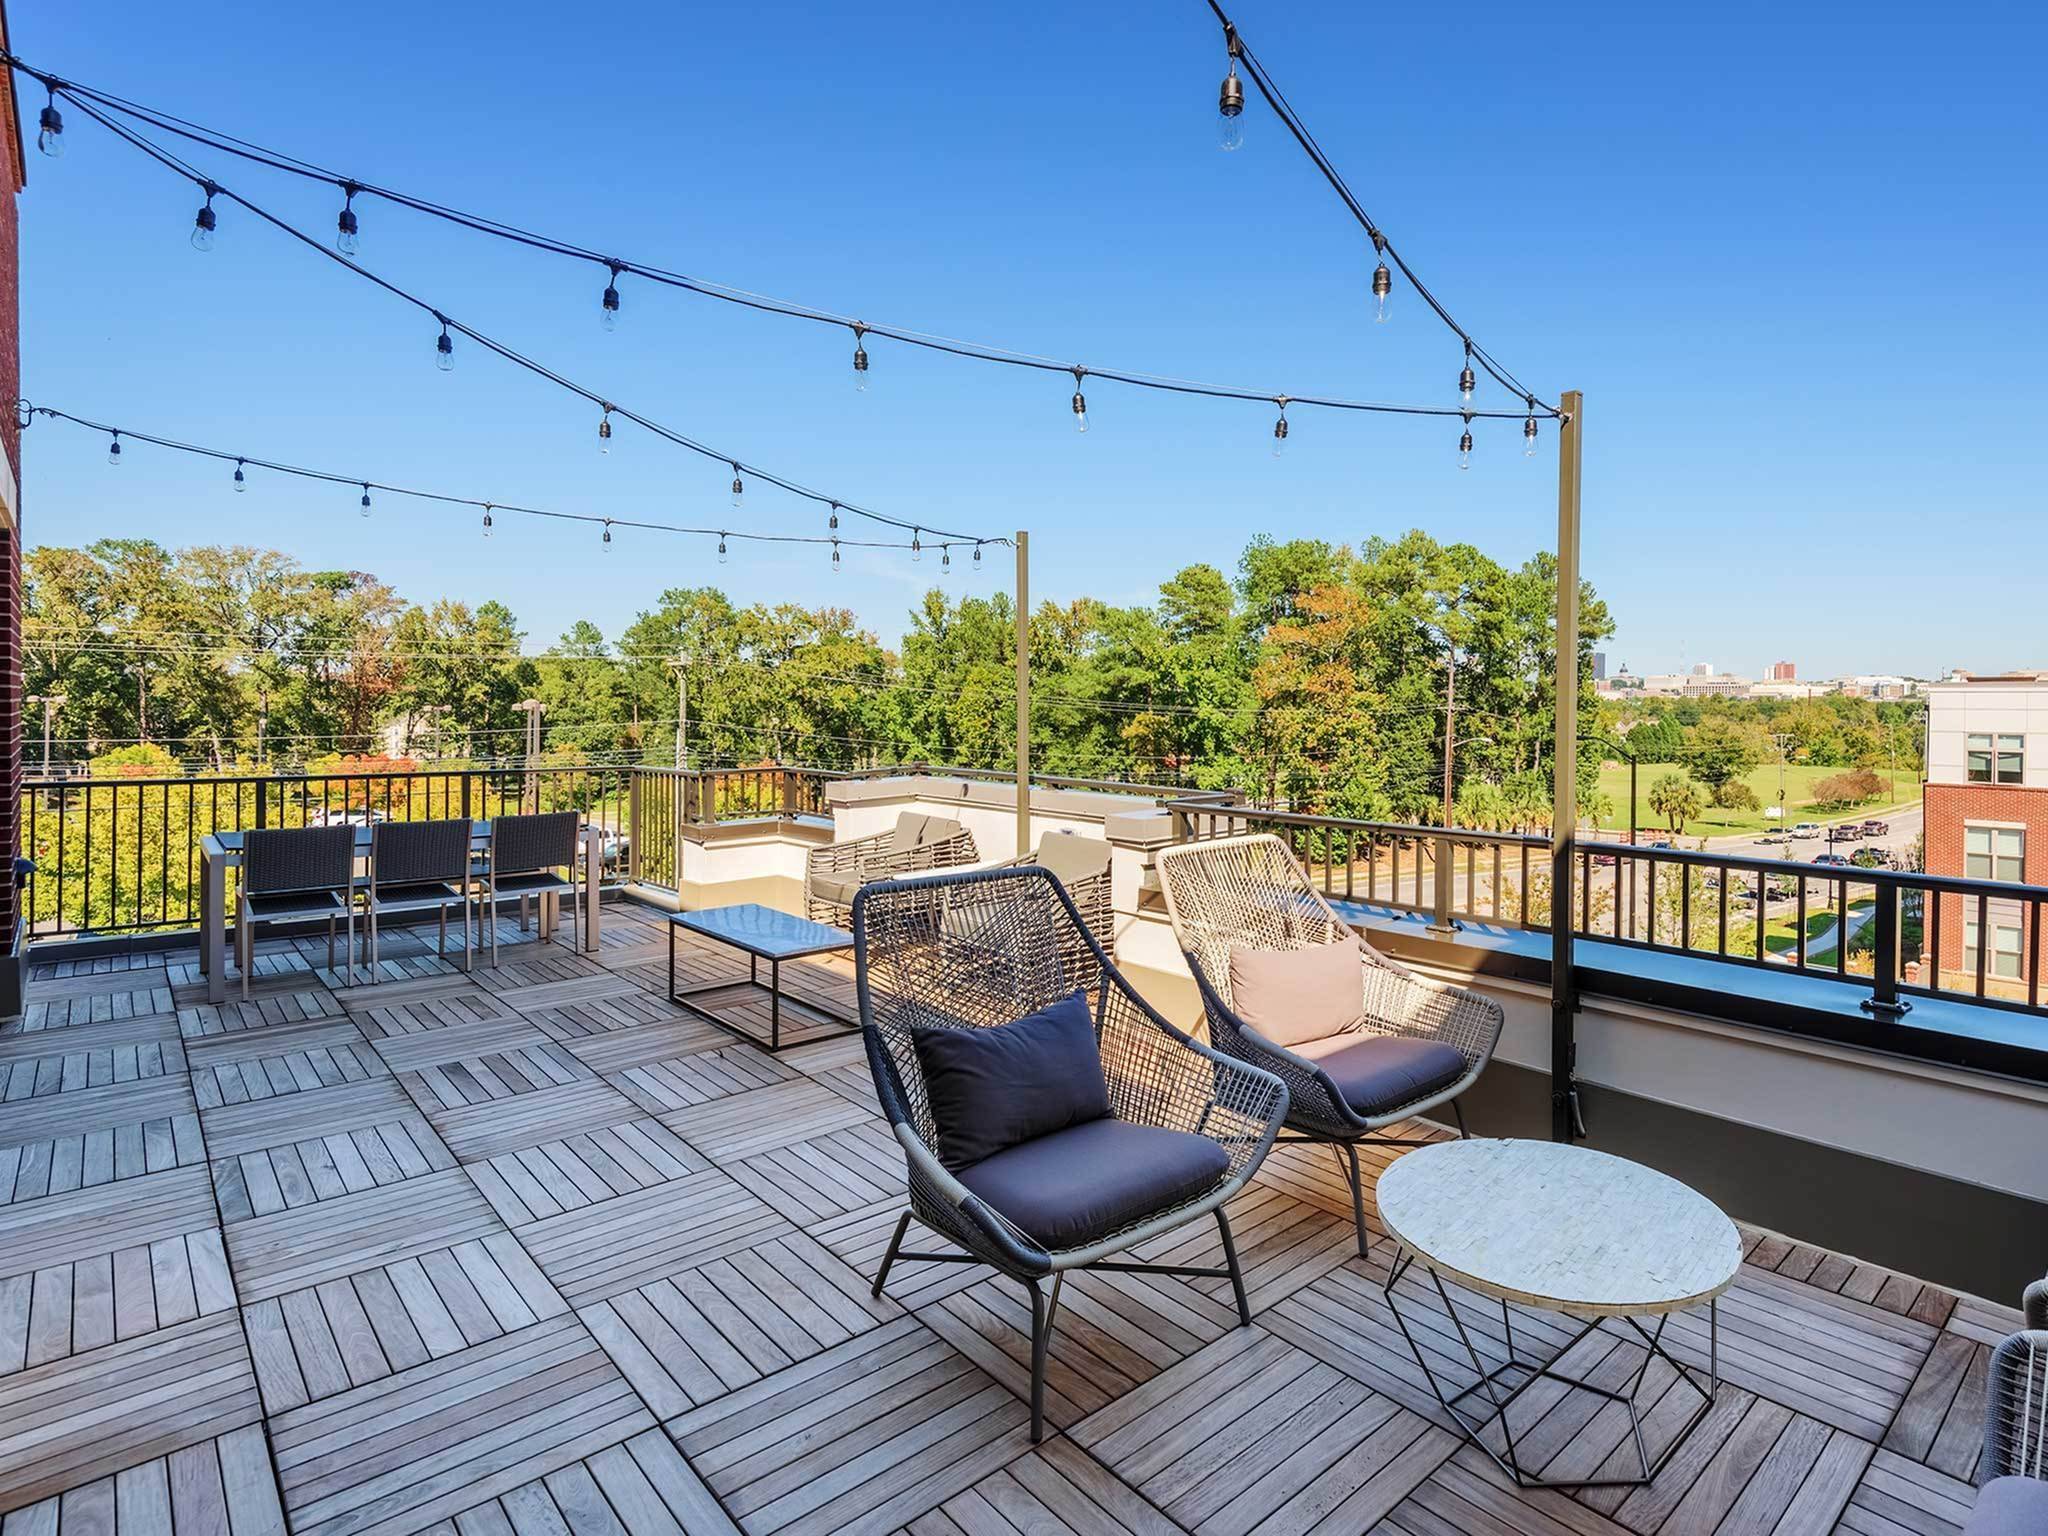 Advenir Sky Lounge with views of Downtown Columbia.